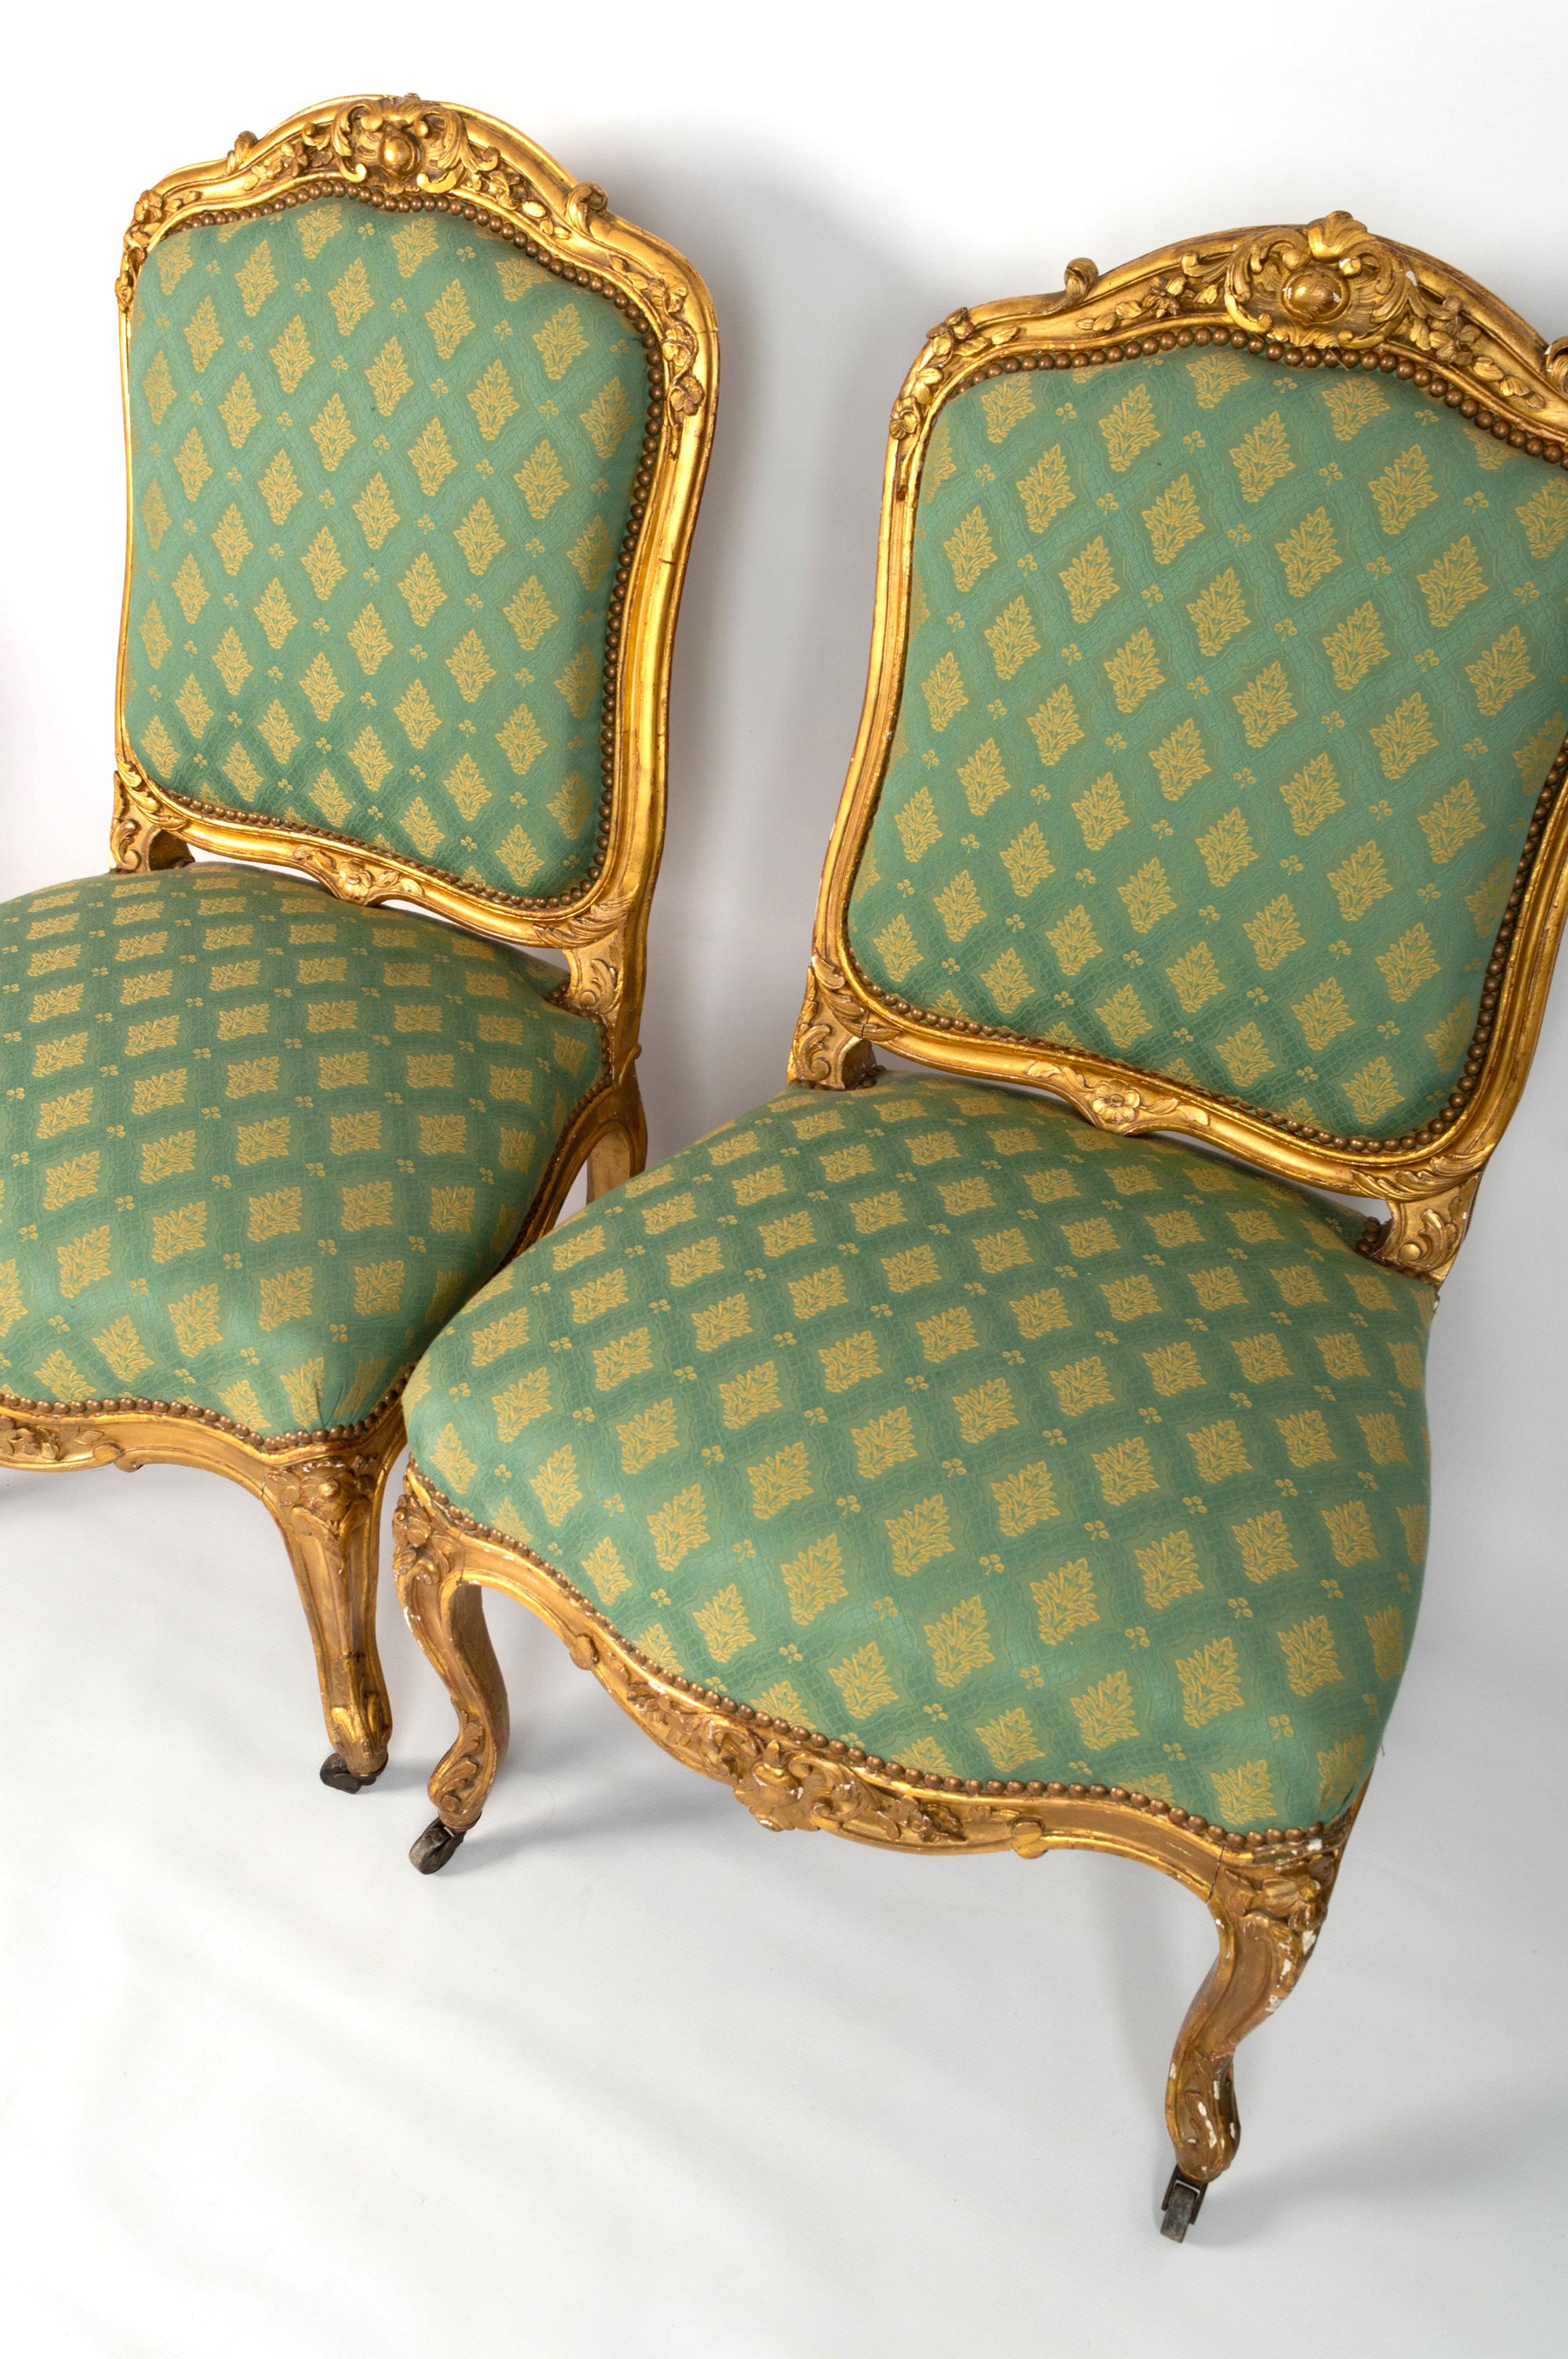 Upholstery Pair Antique French 19th Century Louis XV Style Giltwood Salon Chairs C.1870 For Sale